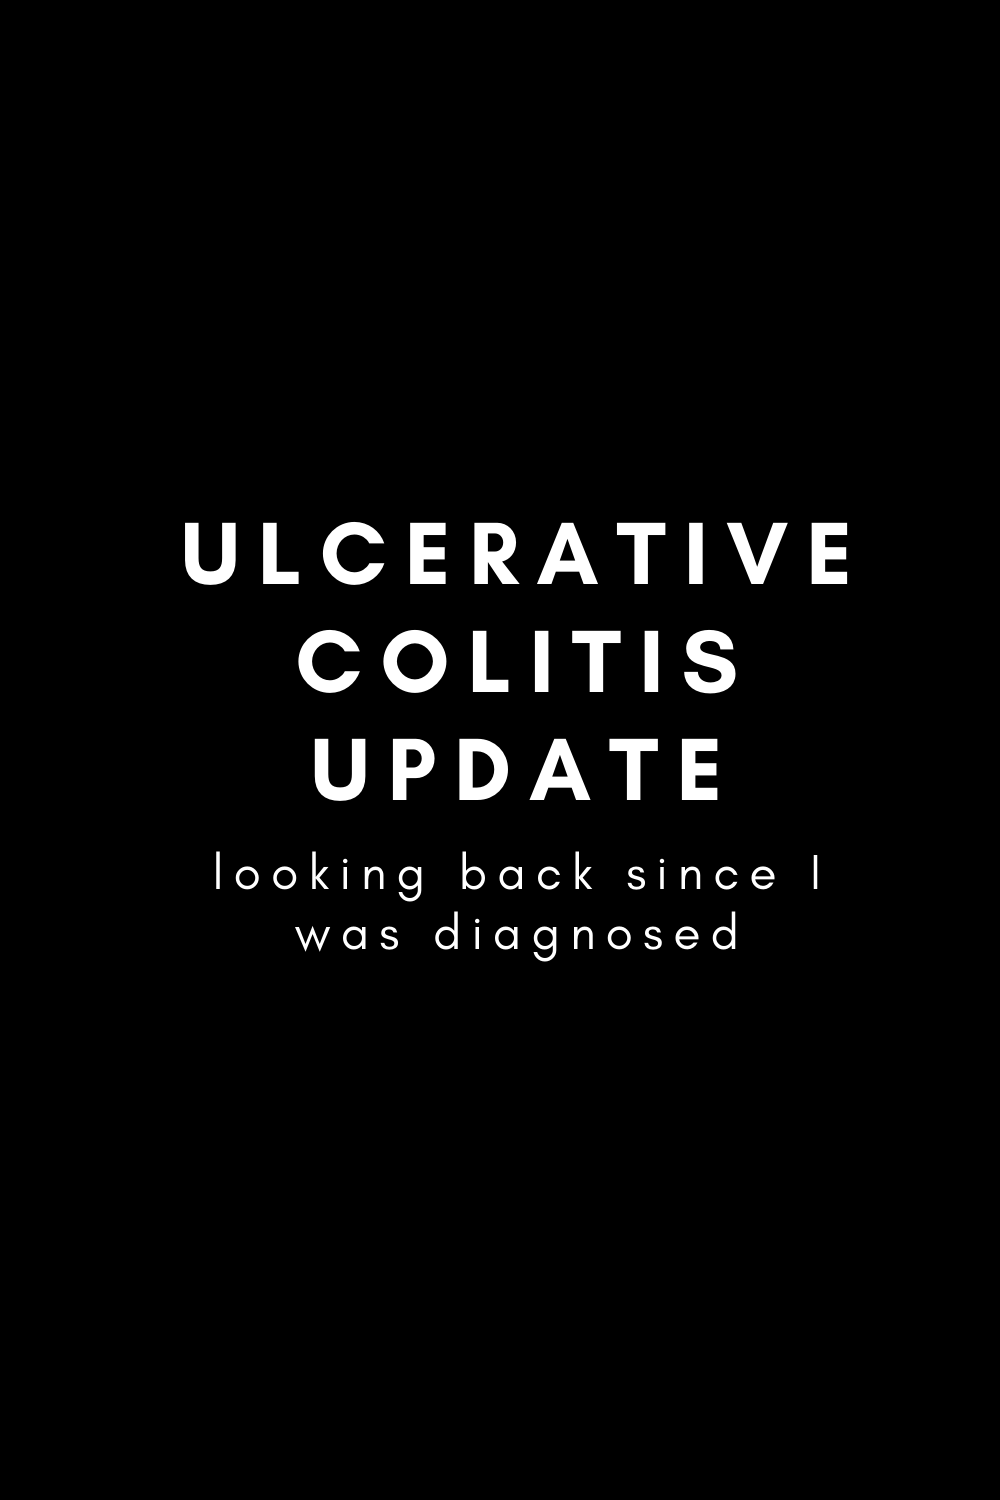 ulcerative colitis update, lments of style, la blogger, uc, proctitis, mesalamine, uc support group, remission